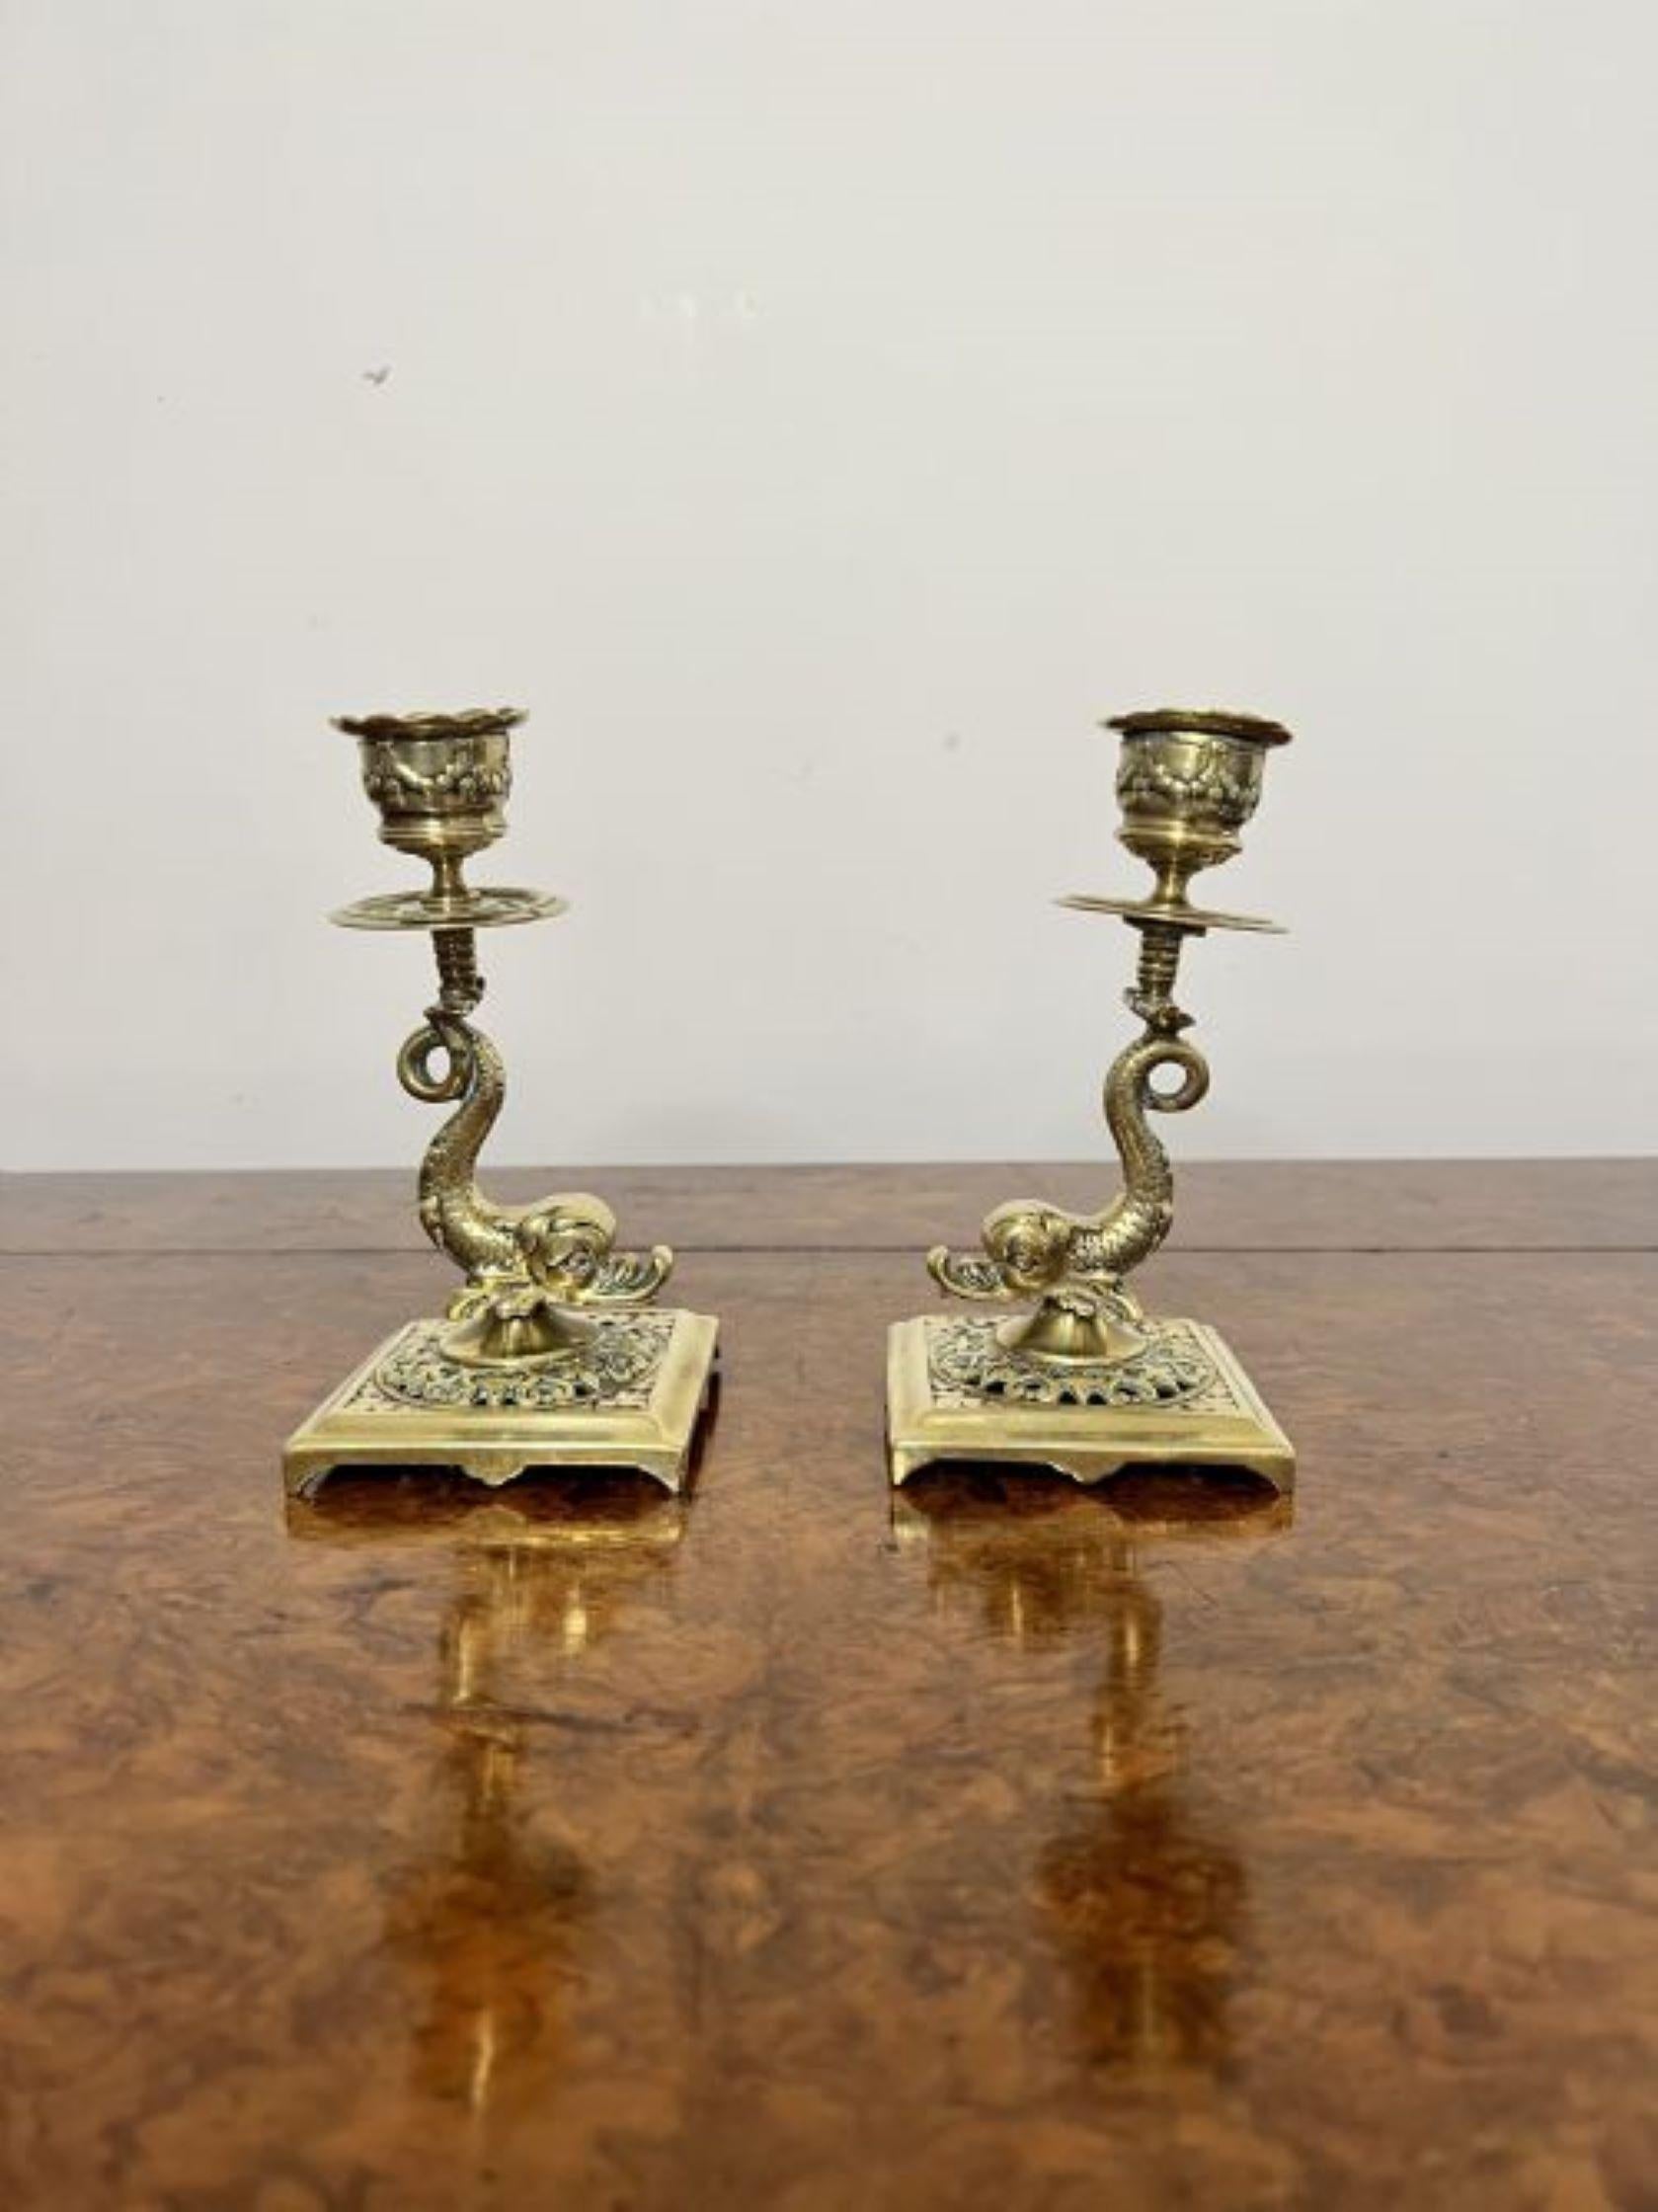 Pair of antique Edwardian quality unusual brass candlesticks having a quality pair of antique Edwardian ornate brass candlesticks with unusual dolphin supports on a square ornate brass base.